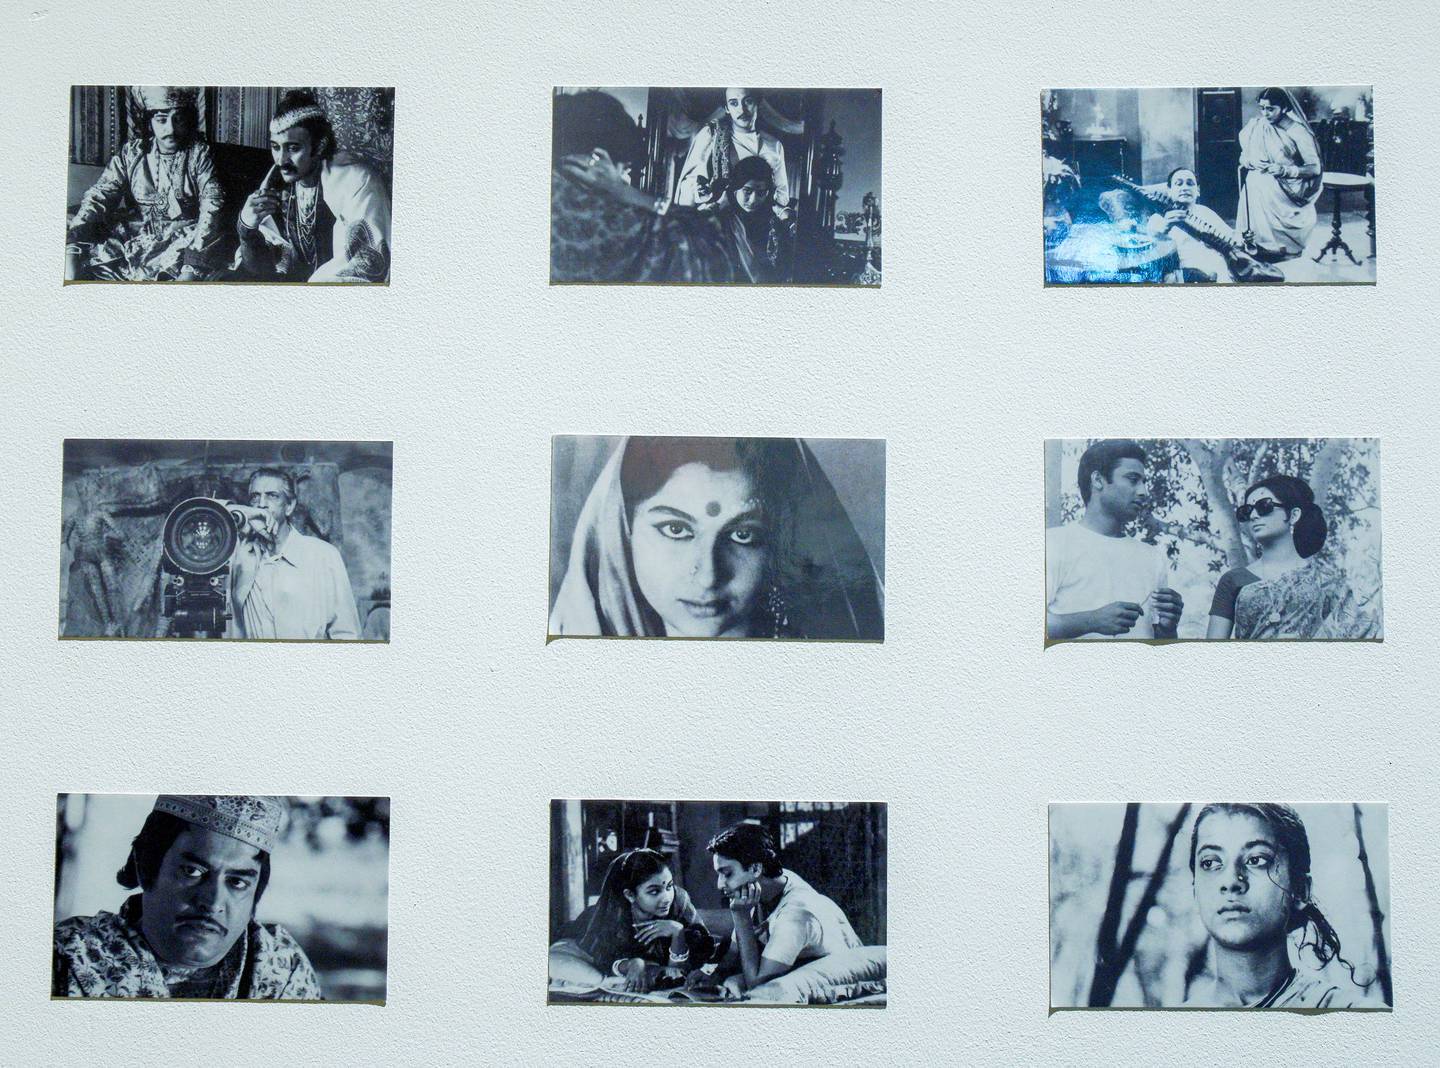 A display of black and white photographs from the movies of renowned director Satyajit Ray. Victor Besa / The National